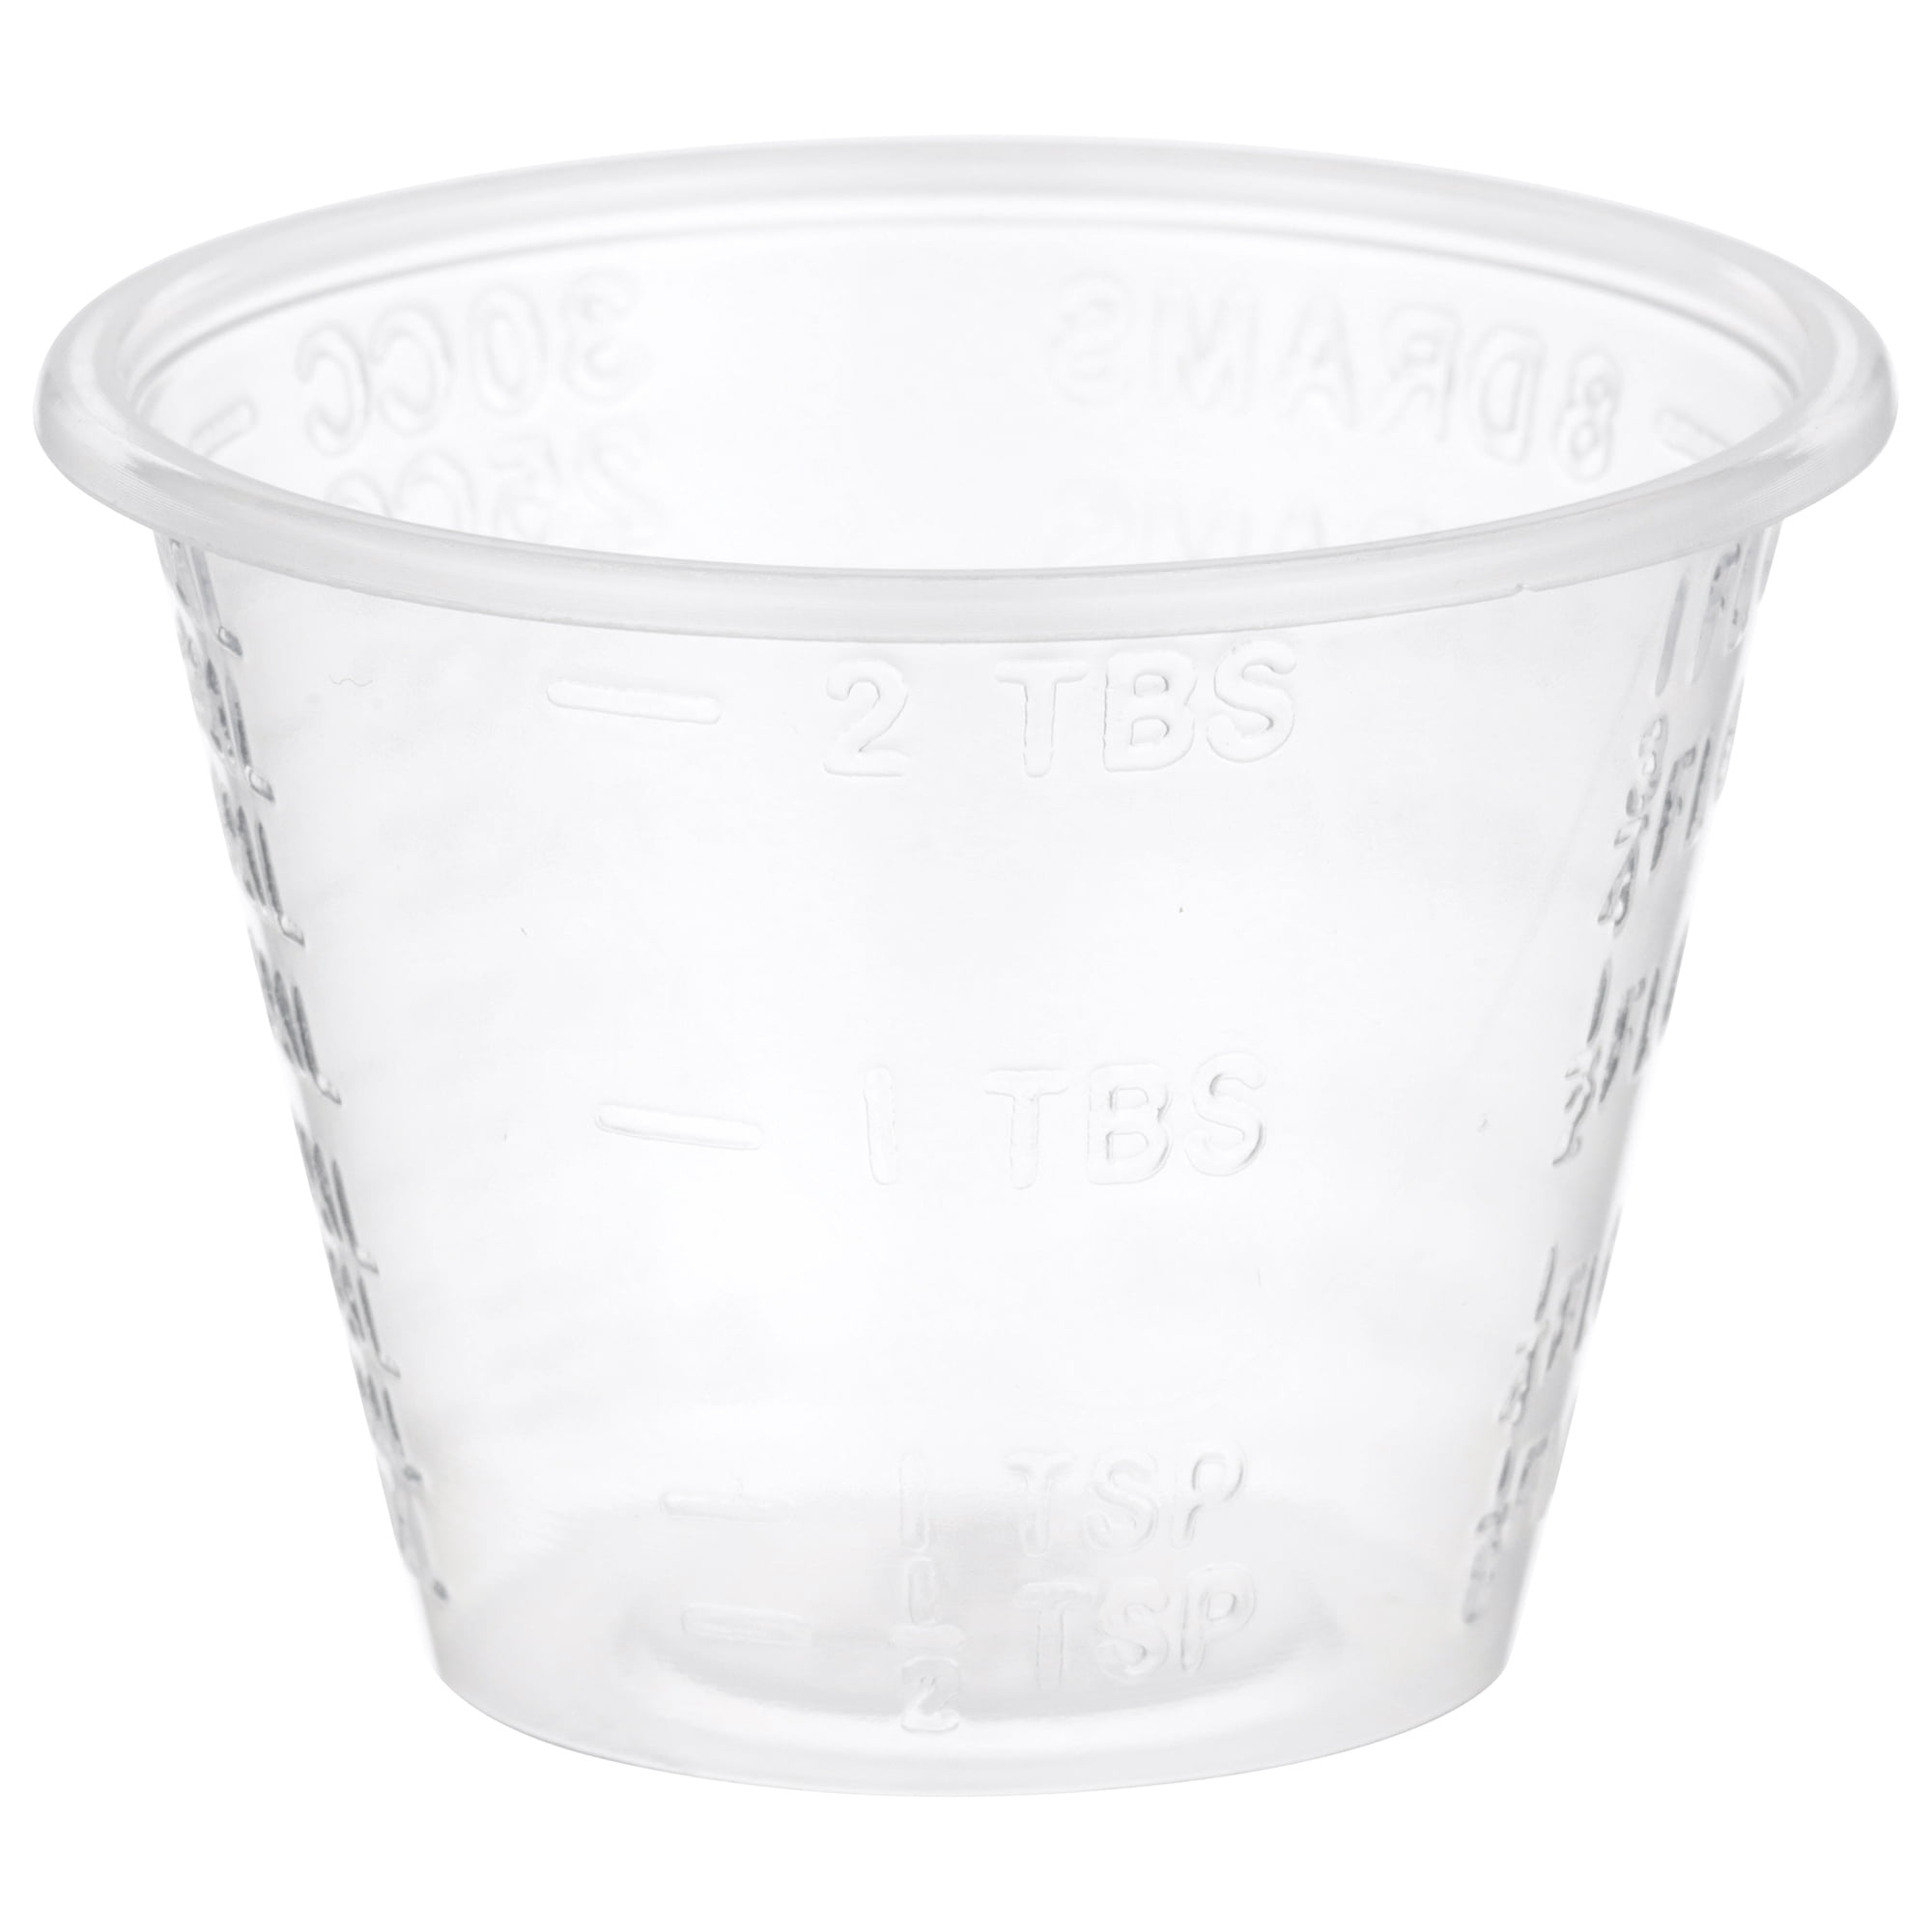 100 Disposable 30ml Measuring Cups Clear Graduated 1 Oz Shot Glass Cal –  Grand Parfums II